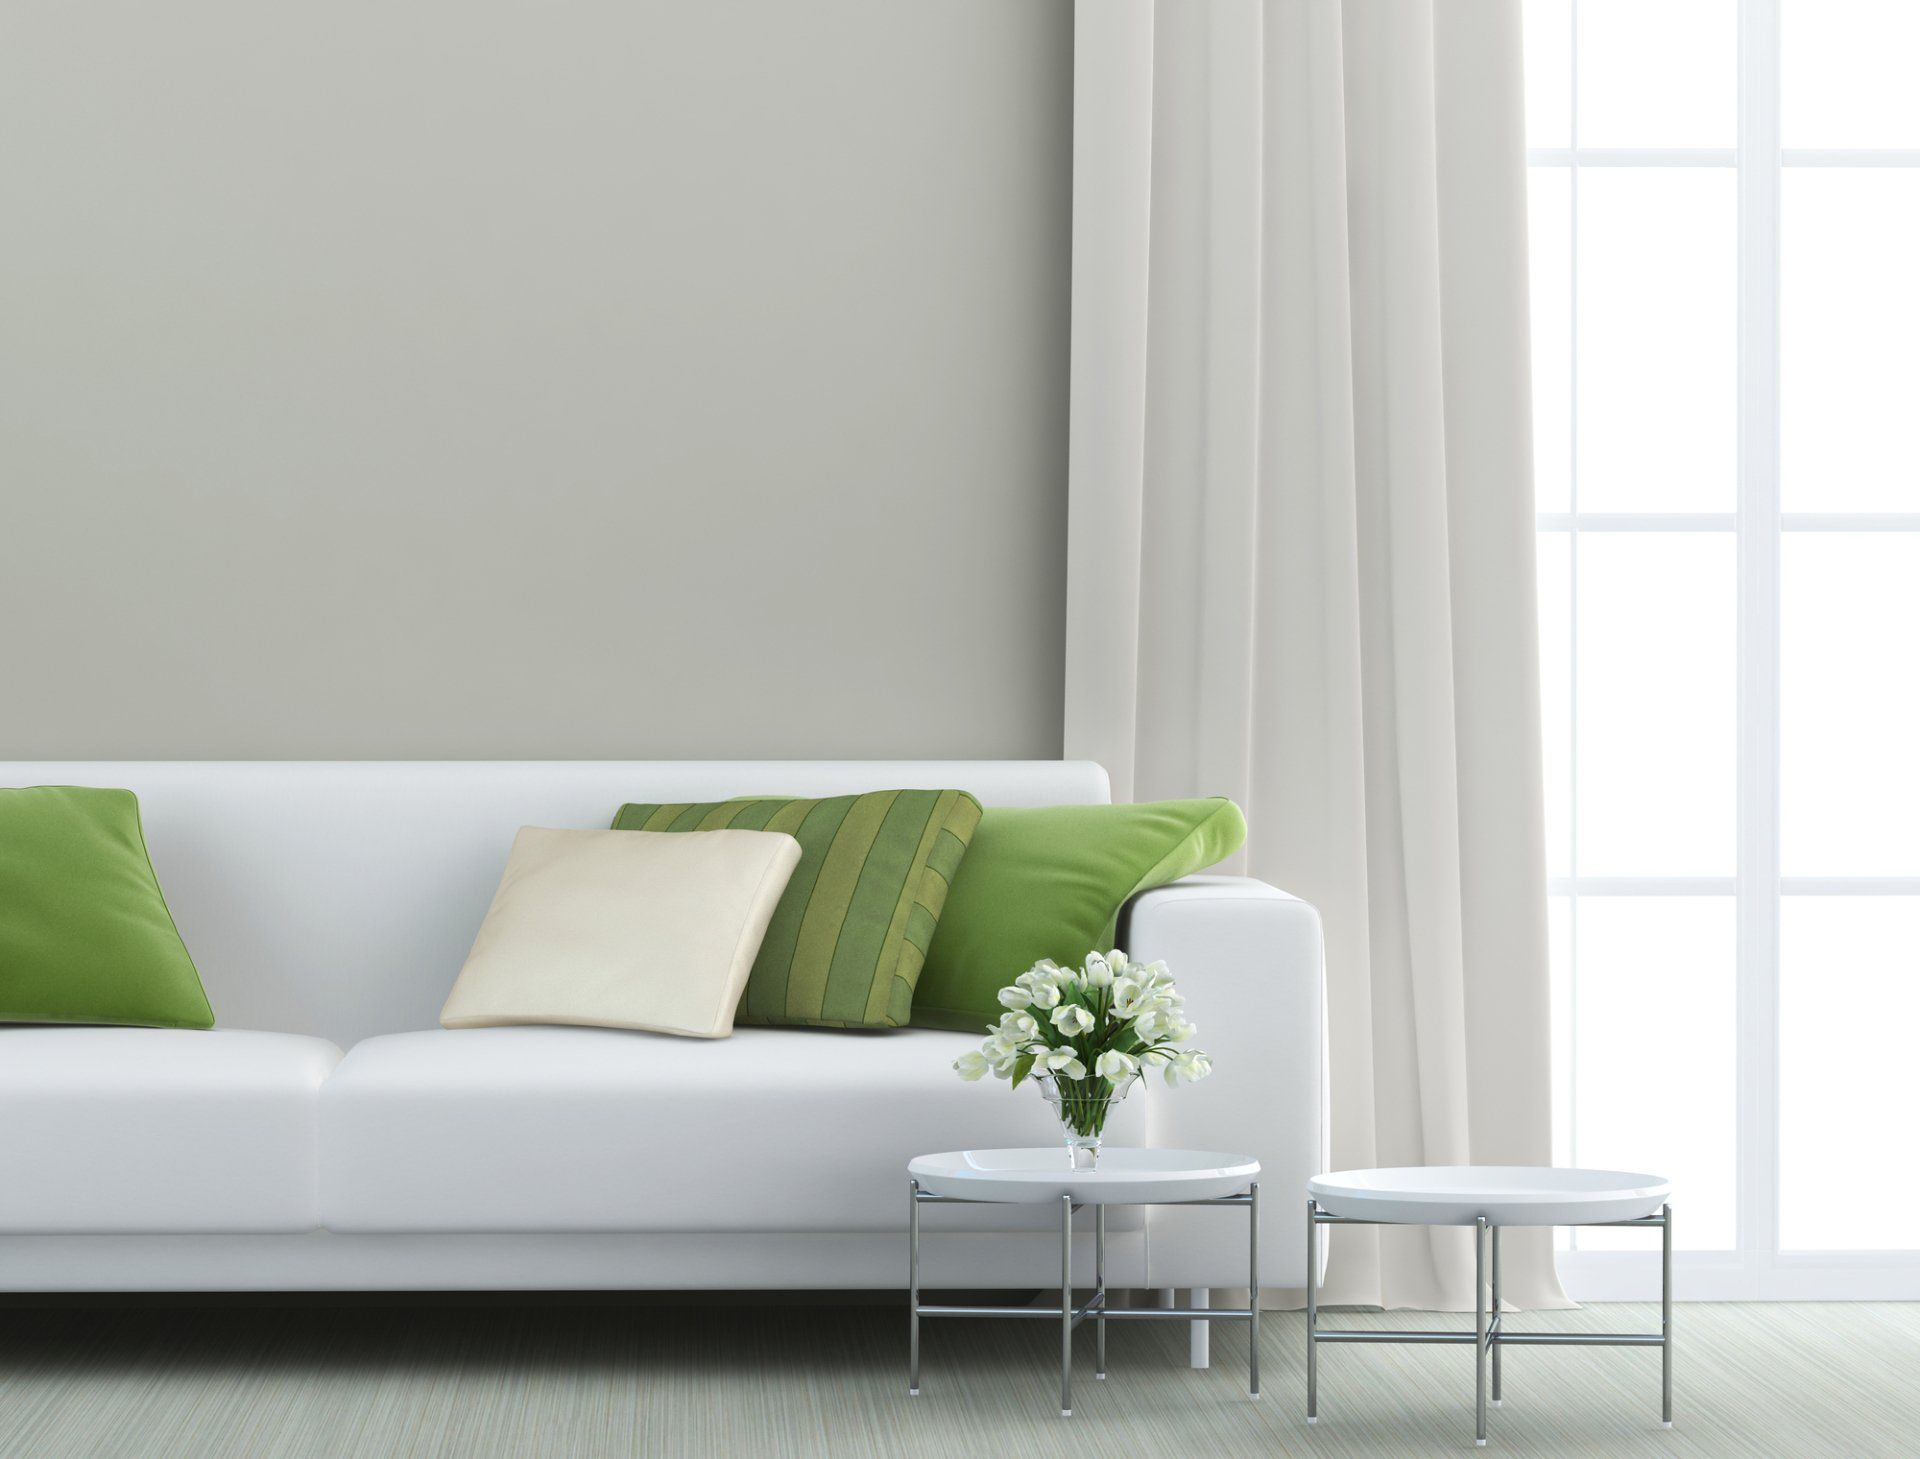 Formal lounge with white couch and green cushions, in front of white and chrome mini coffee tables with flowers, framed by formal white curtains opened over light filled window.